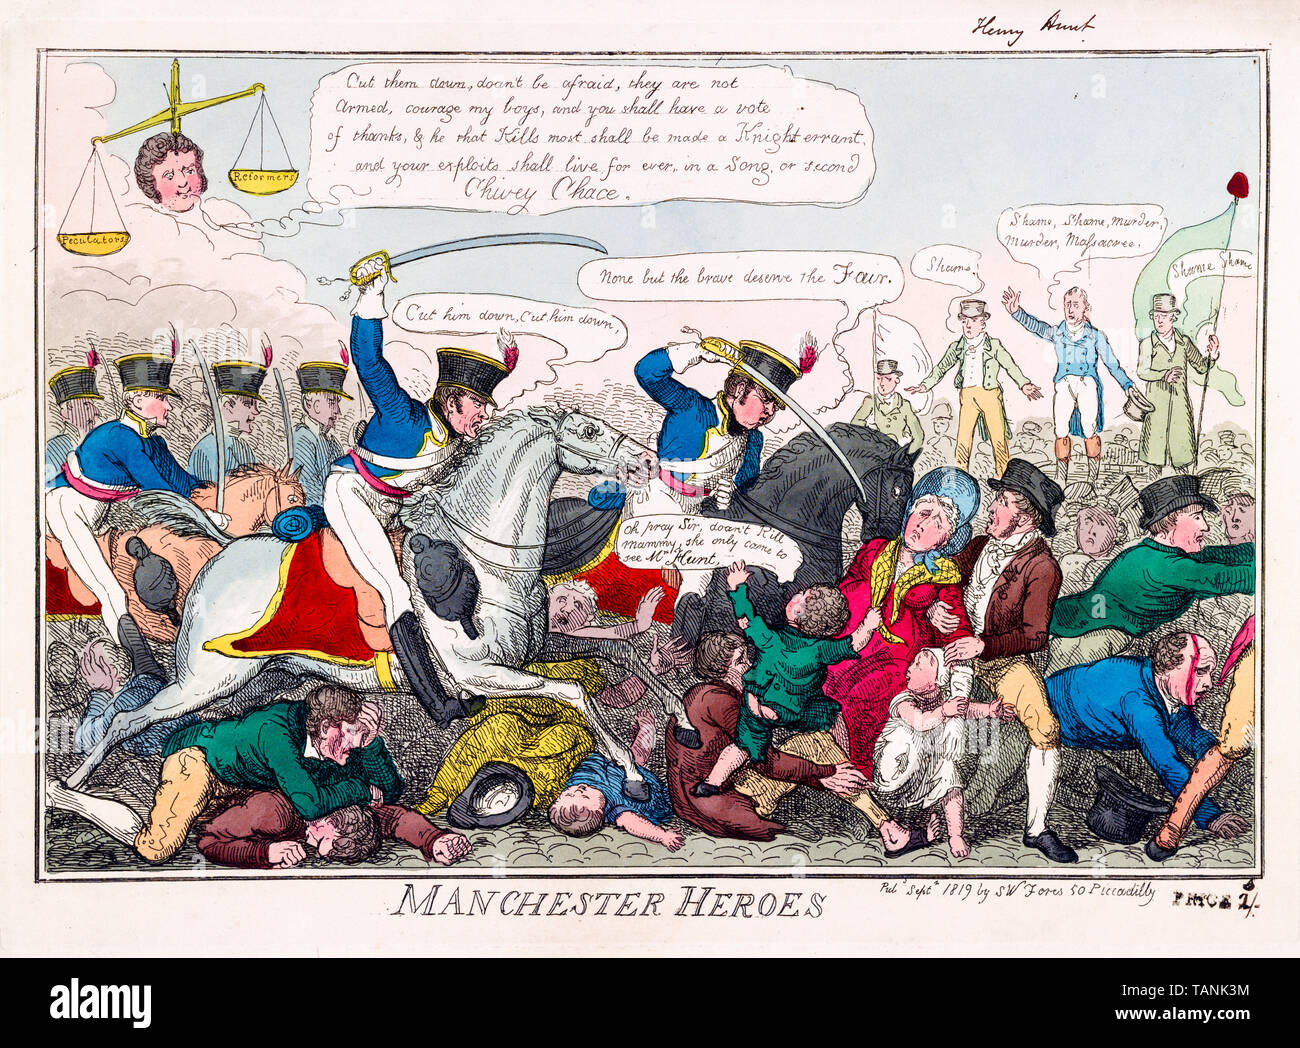 Manchester heroes, the Peterloo Massacre, engraving, 1819 Stock Photo